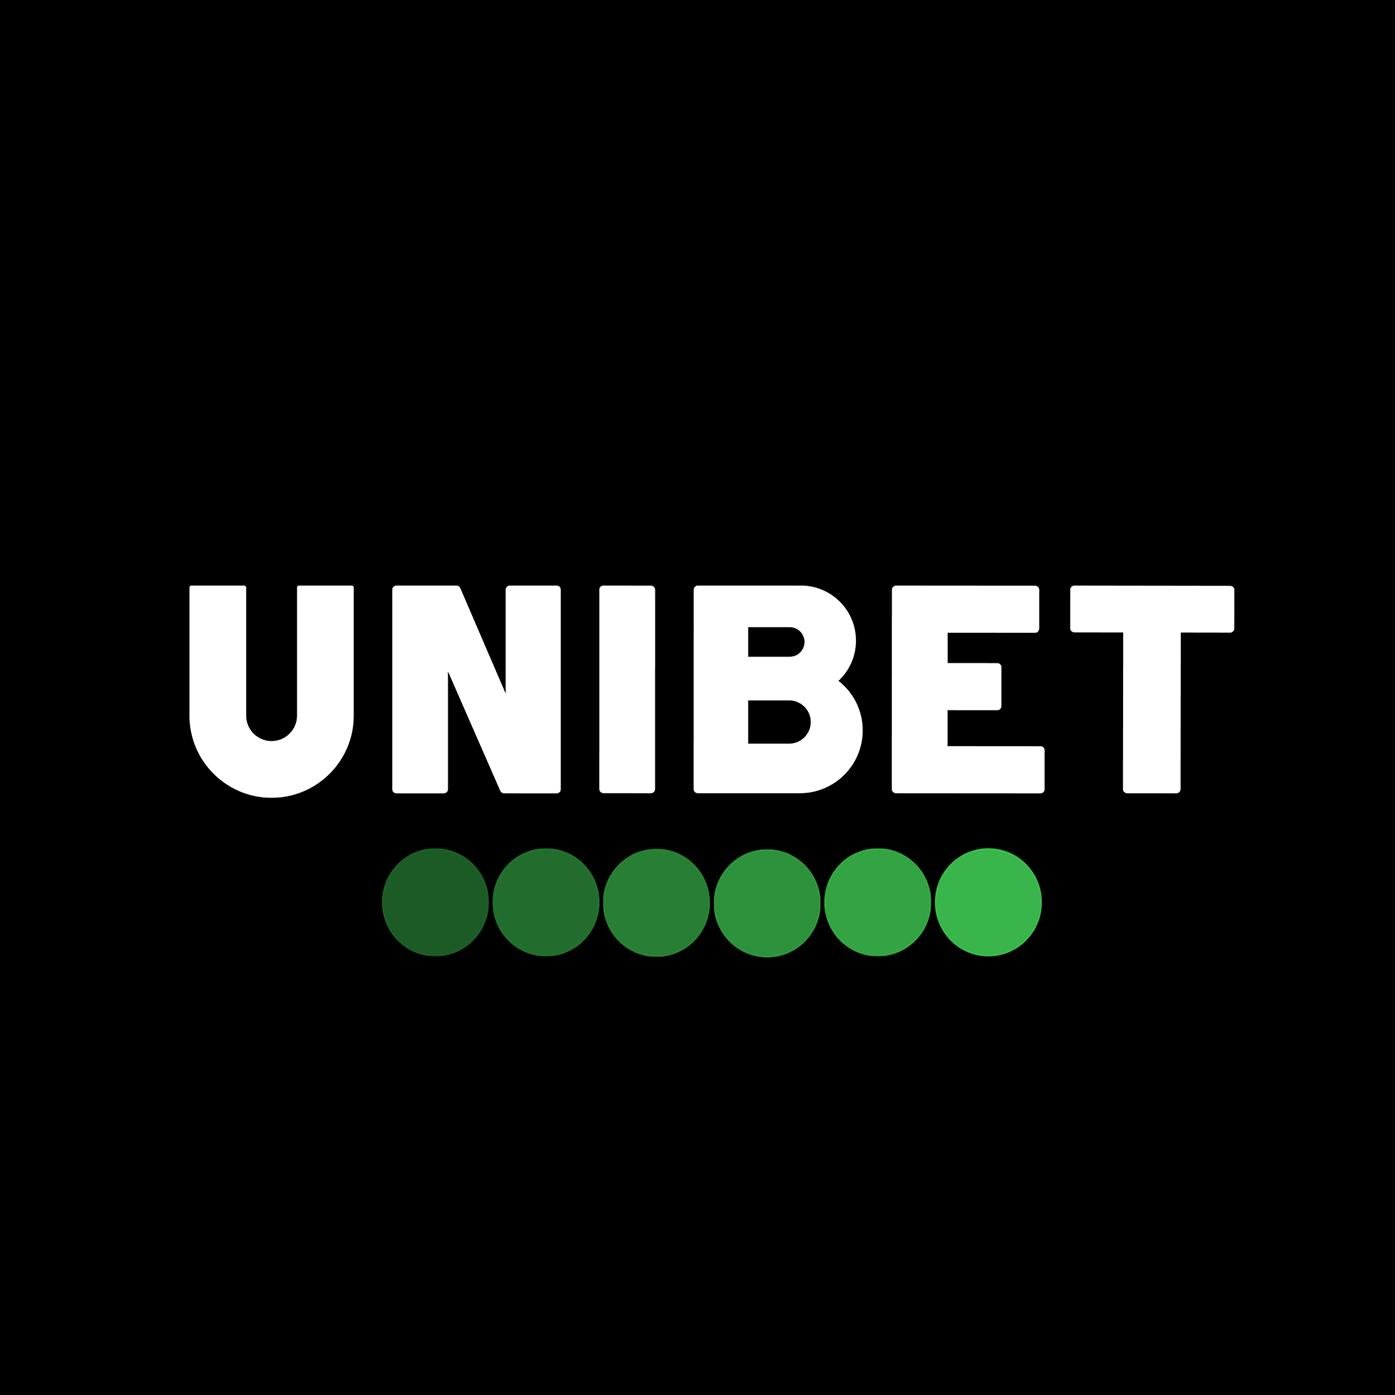 Welcome to the Home Of All The Action! 🎲🍒🏈
21+. Gambling Problem? Call 1-800-GAMBLER
Download the New Unibet App in NJ👇🏻